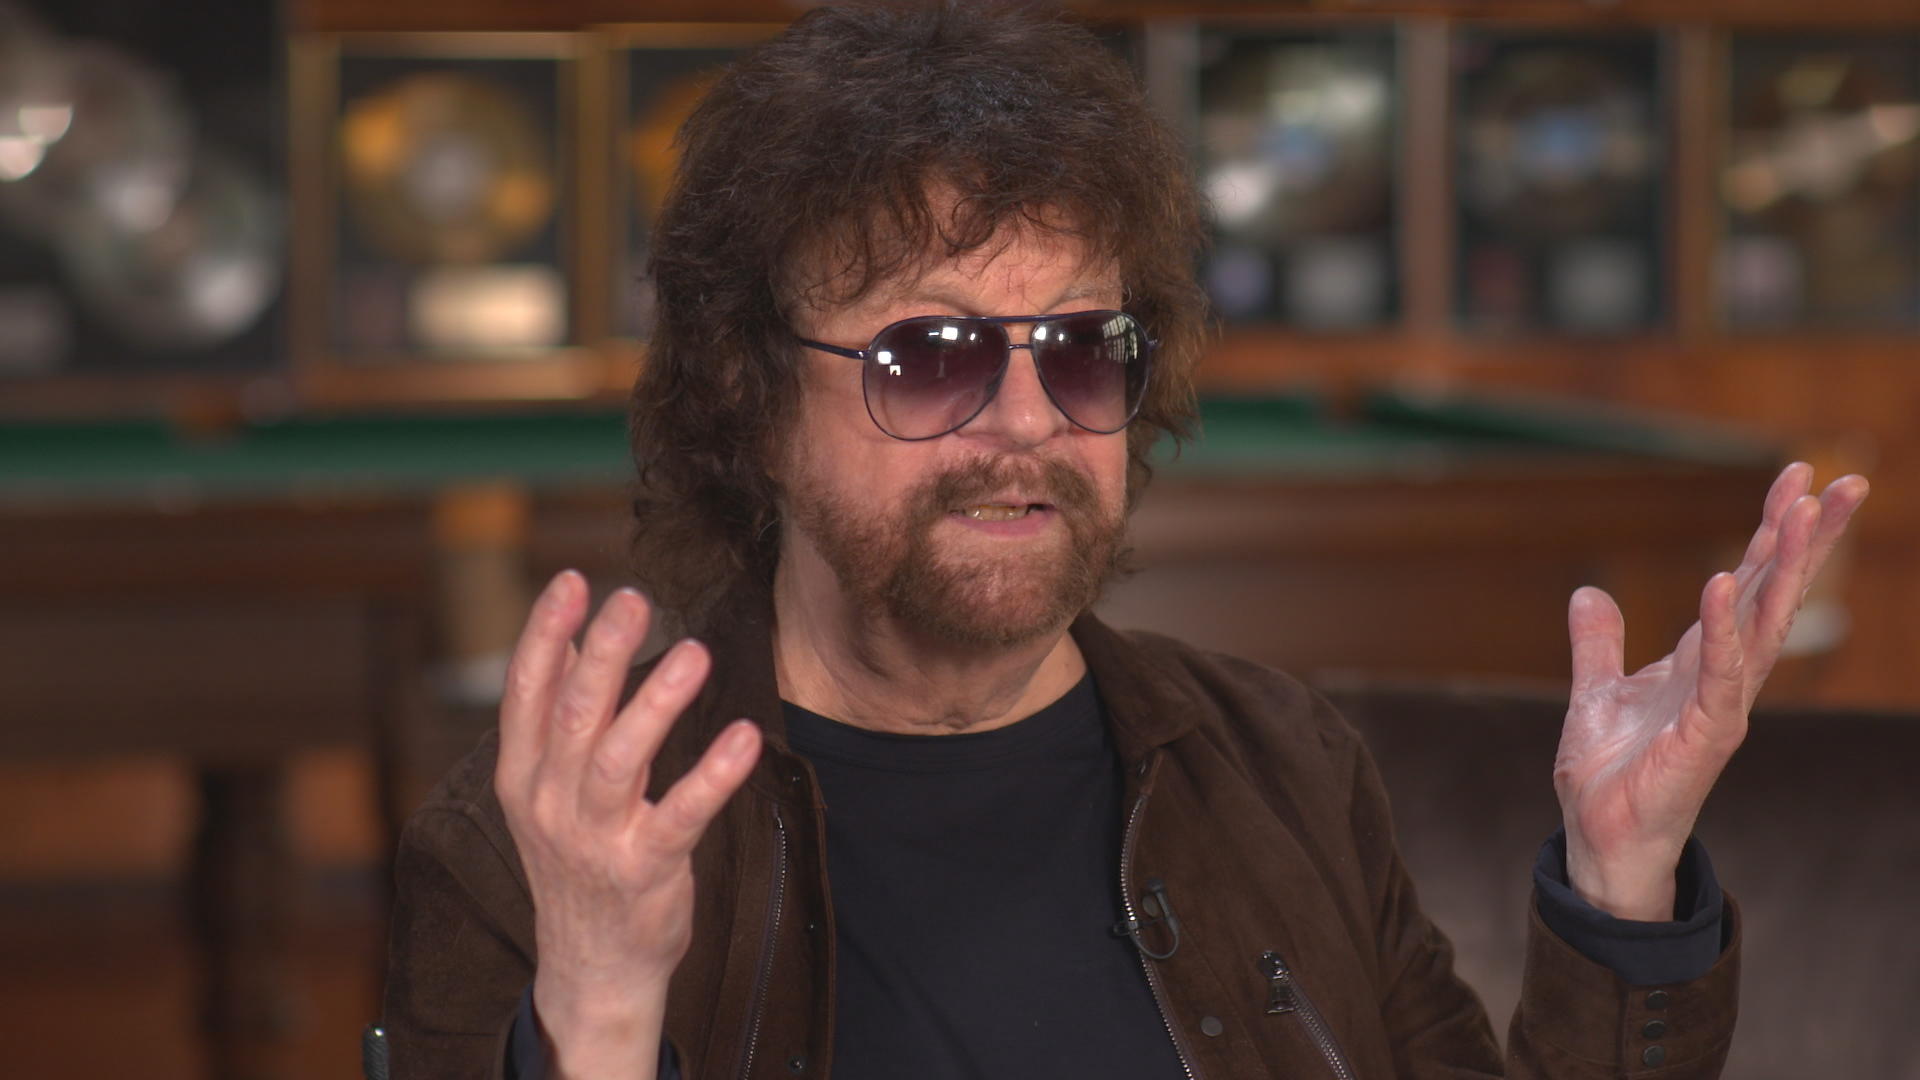 Jeff Lynne, the reluctant rock star, returns with Jeff Lynne's ELO